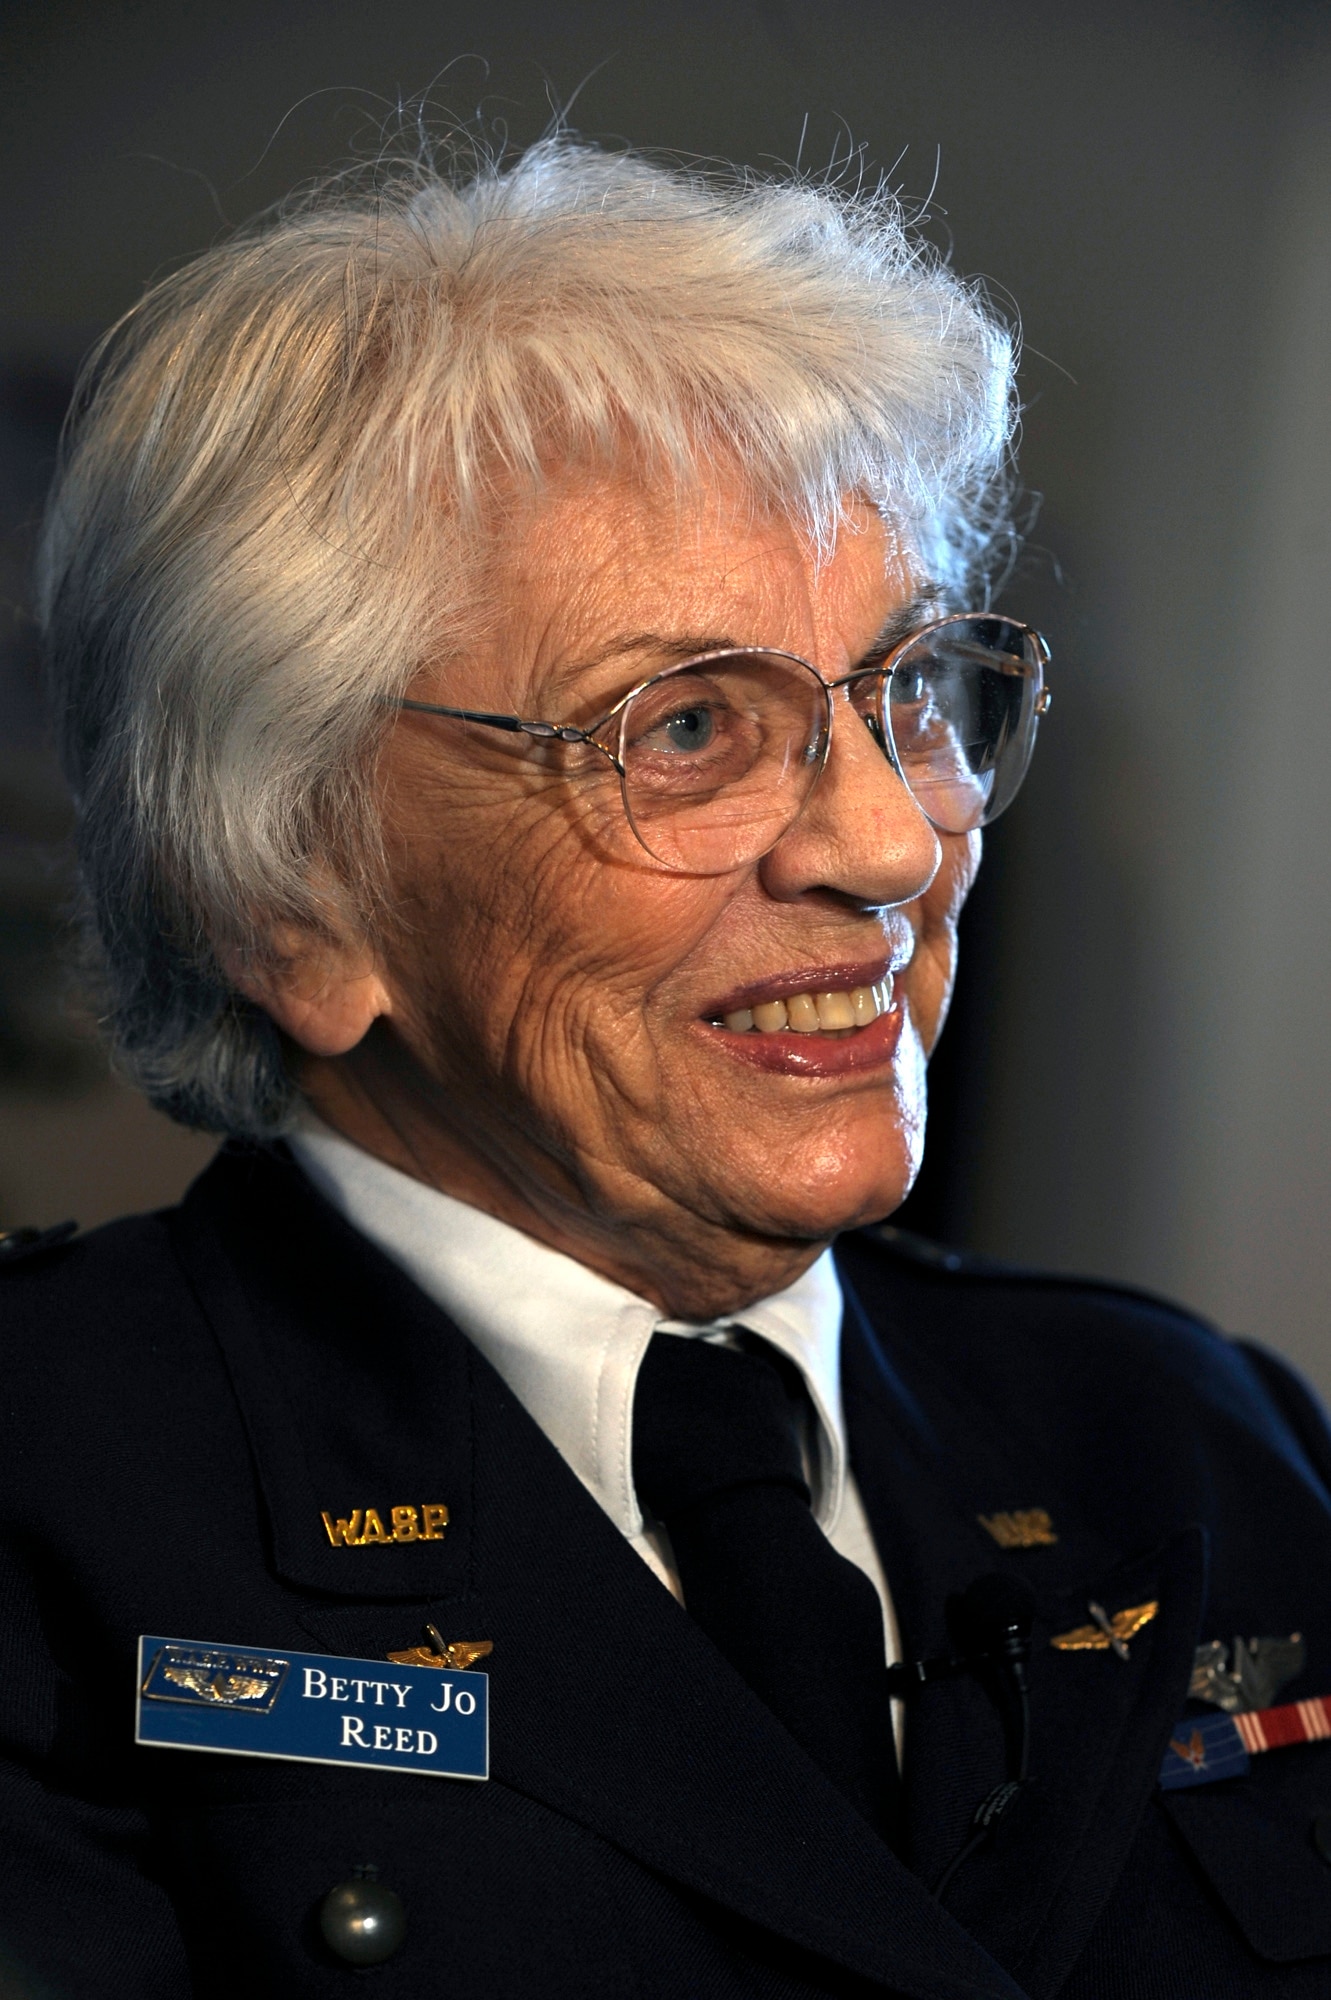 Betty Jo Streff-Reed recalls her days as a female pilot at the National WASP World War II Museum Jan. 8 in Sweetwater, Texas. Ms. Streff-Reed was a WASP from January to December 1944. (U.S. Air Force photo/Staff Sgt. Desiree N. Palacios)